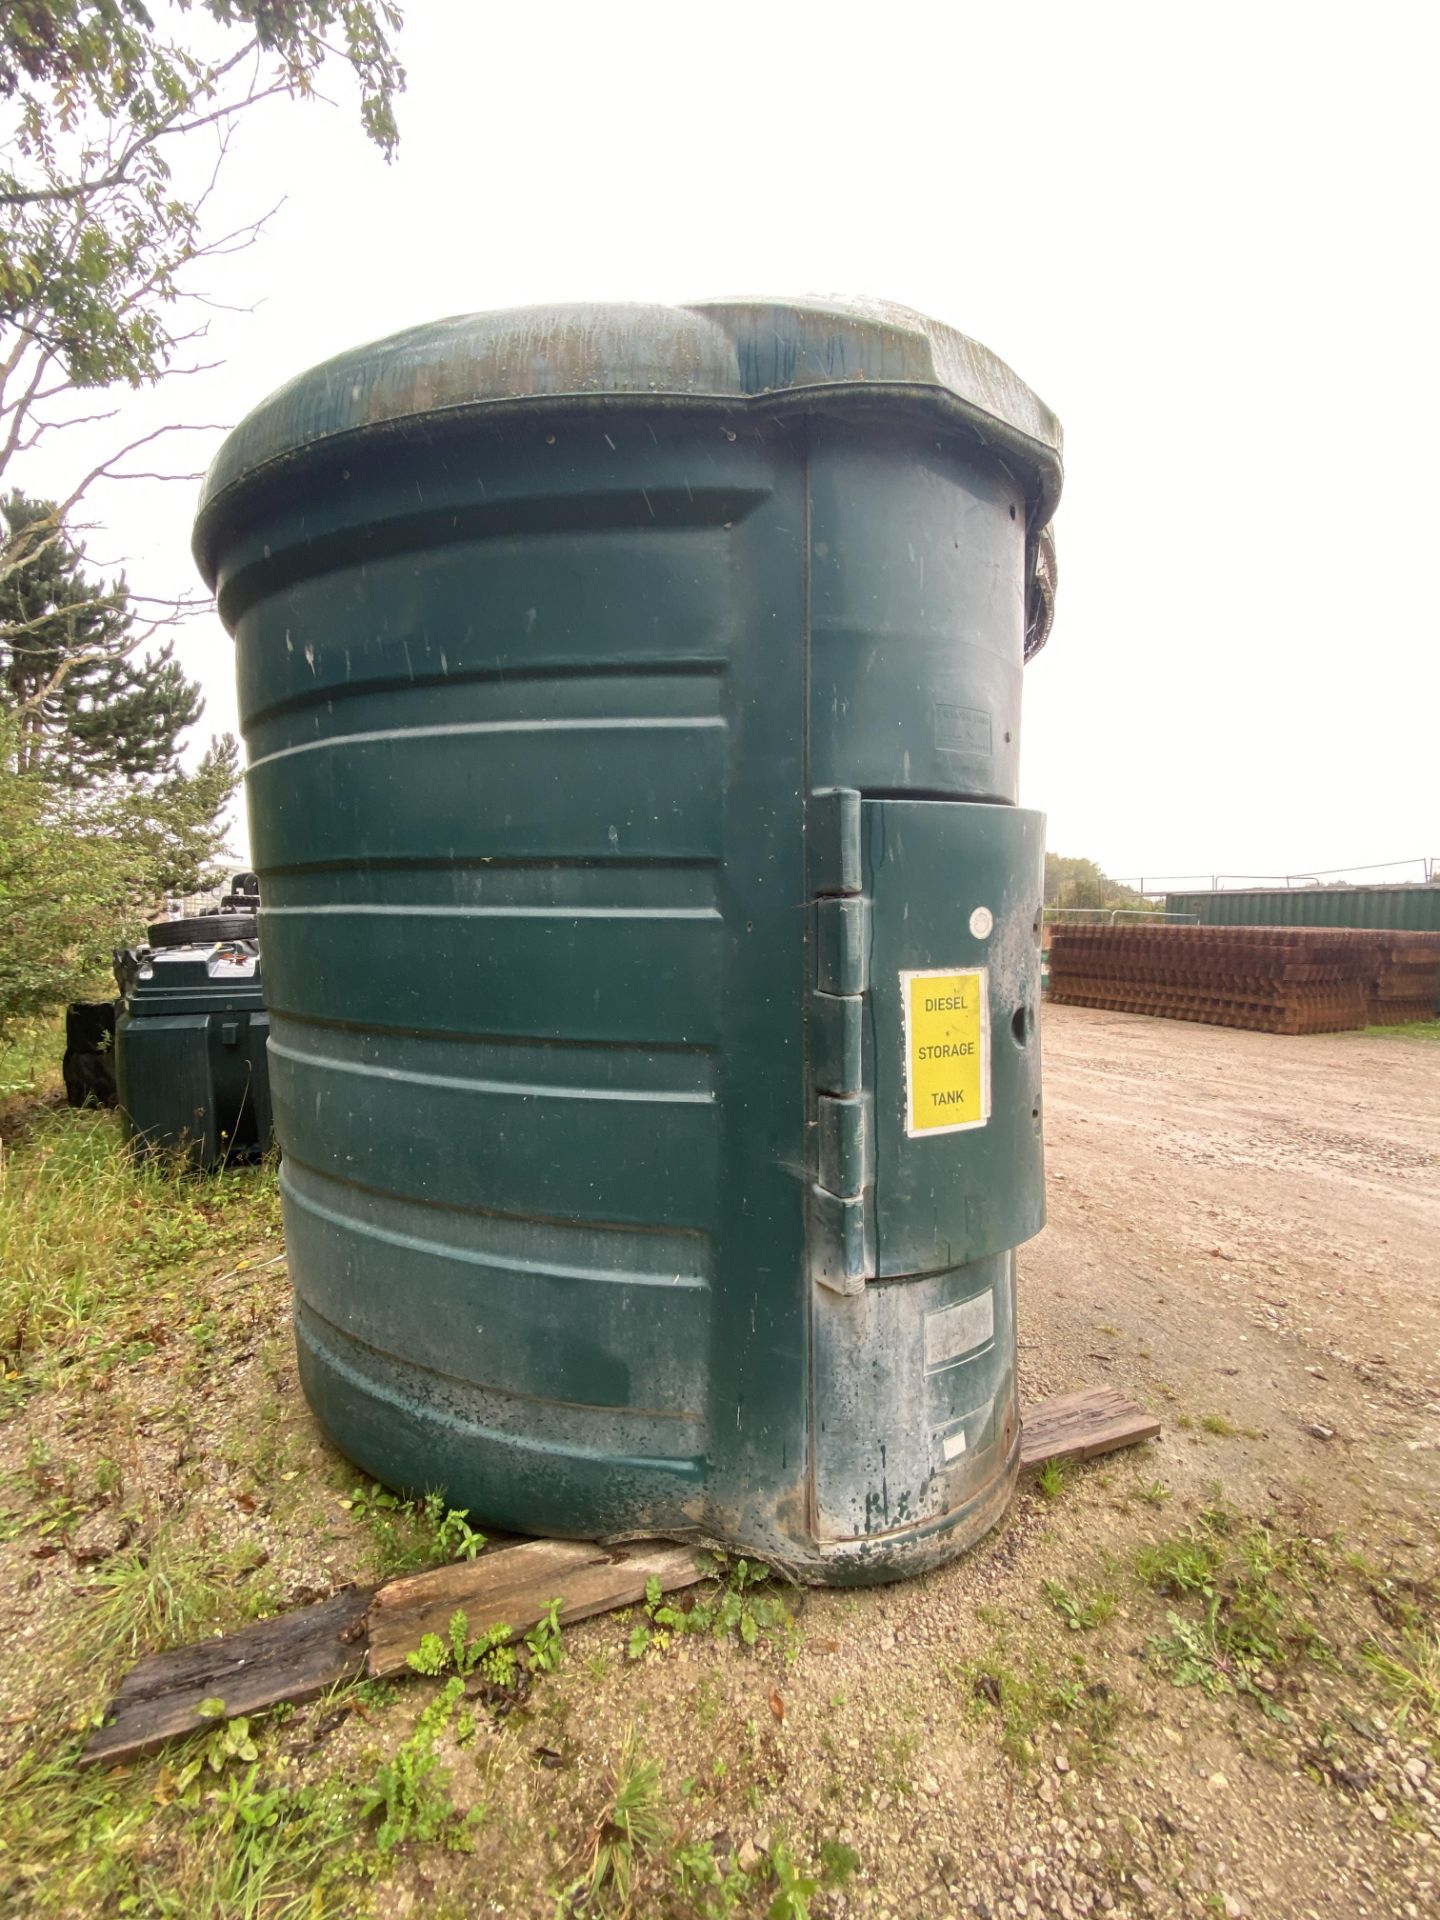 Balmoral BUNDED PLASTIC DIESEL TANK, approx. 2.75m high x 2.8m dia., with dispensing equipment. - Image 4 of 4